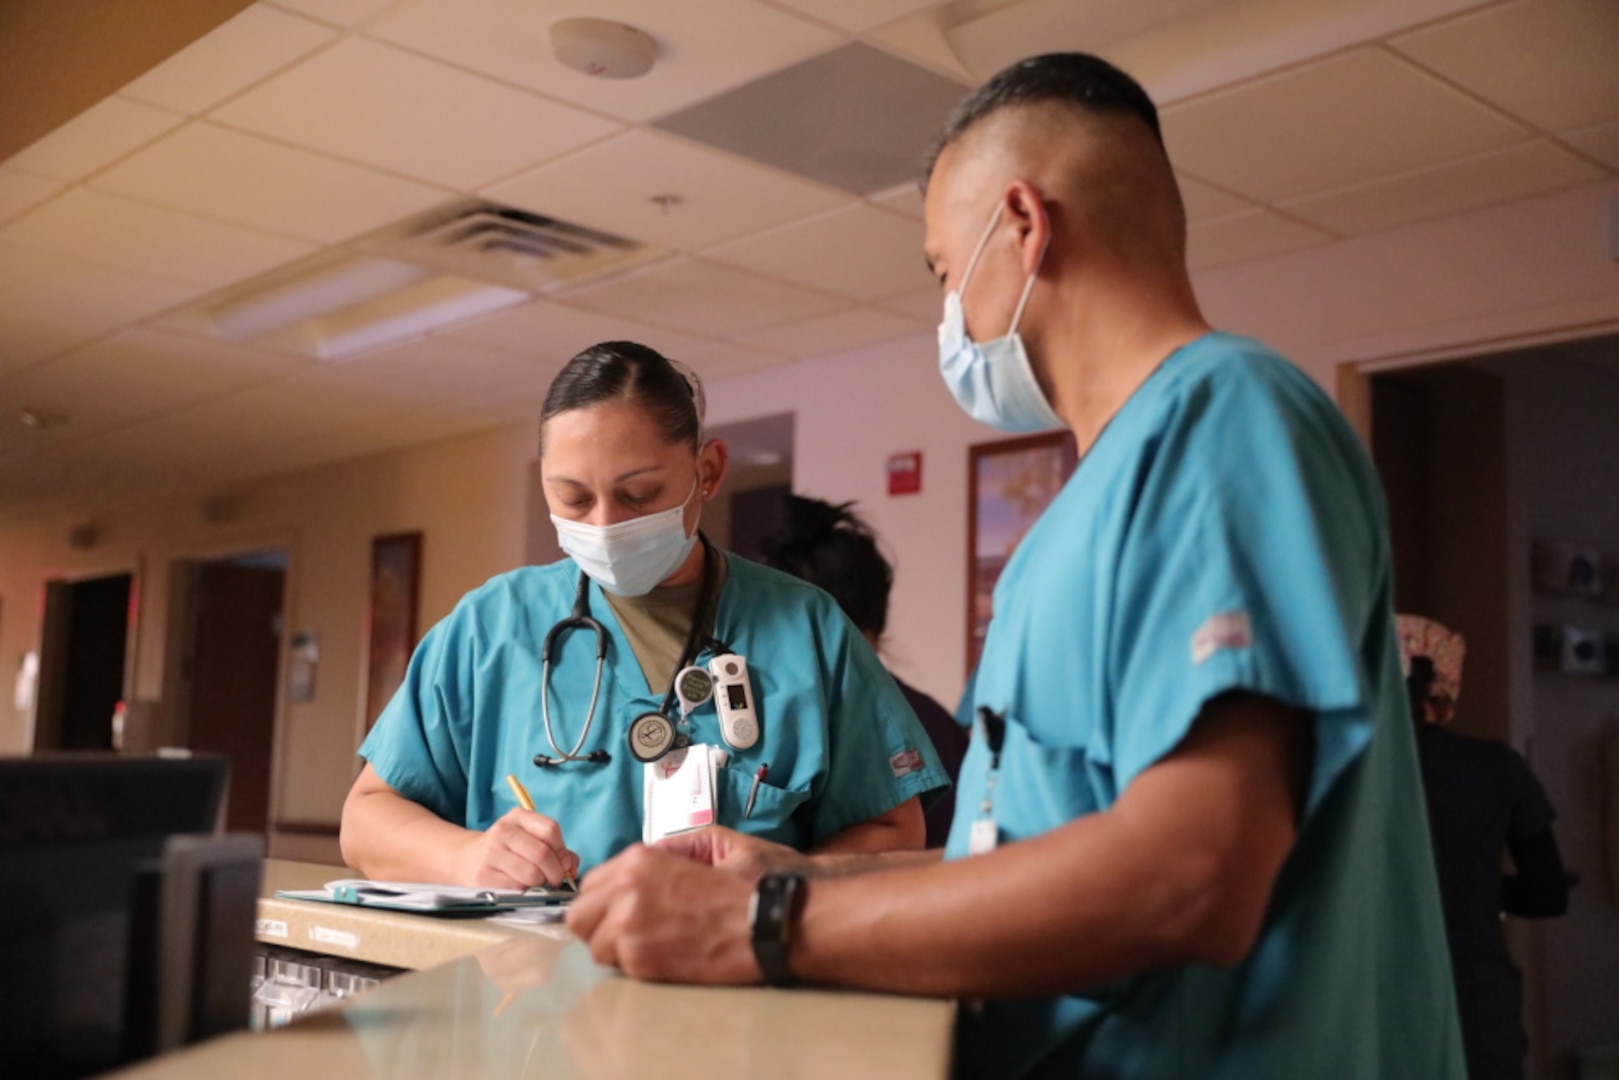 Two nurses wearing medical attire speak at a counter.